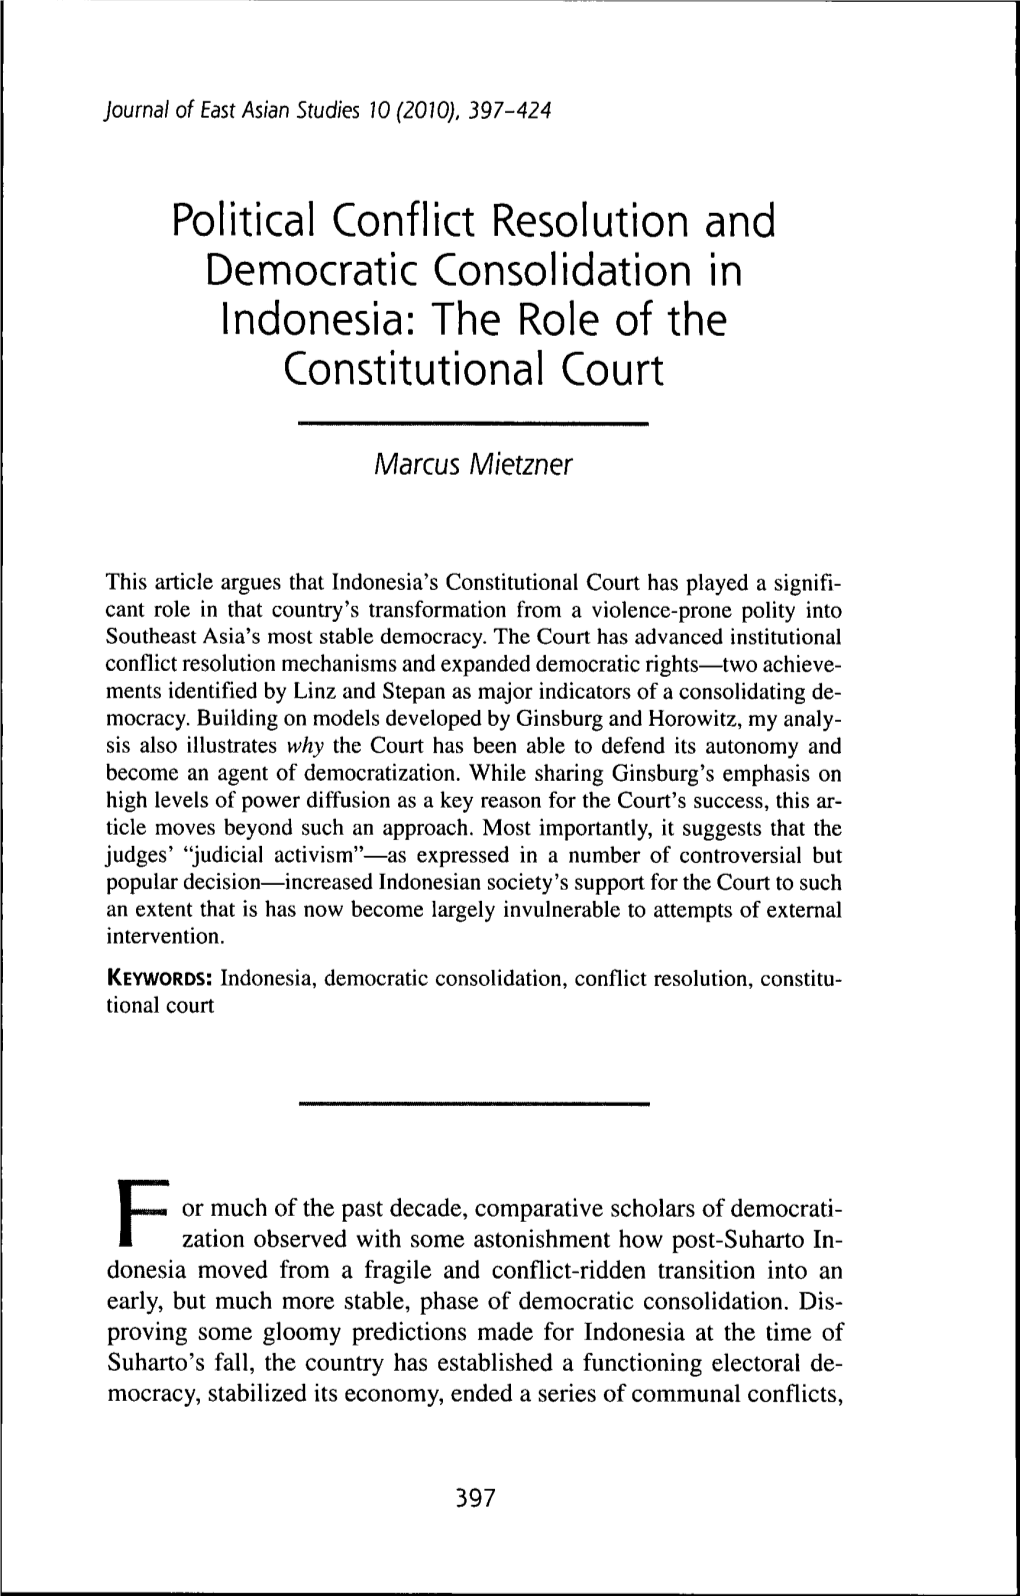 Political Conflict Resolution and Democratic Consolidation in Indonesia: the Role of the Constitutional Court